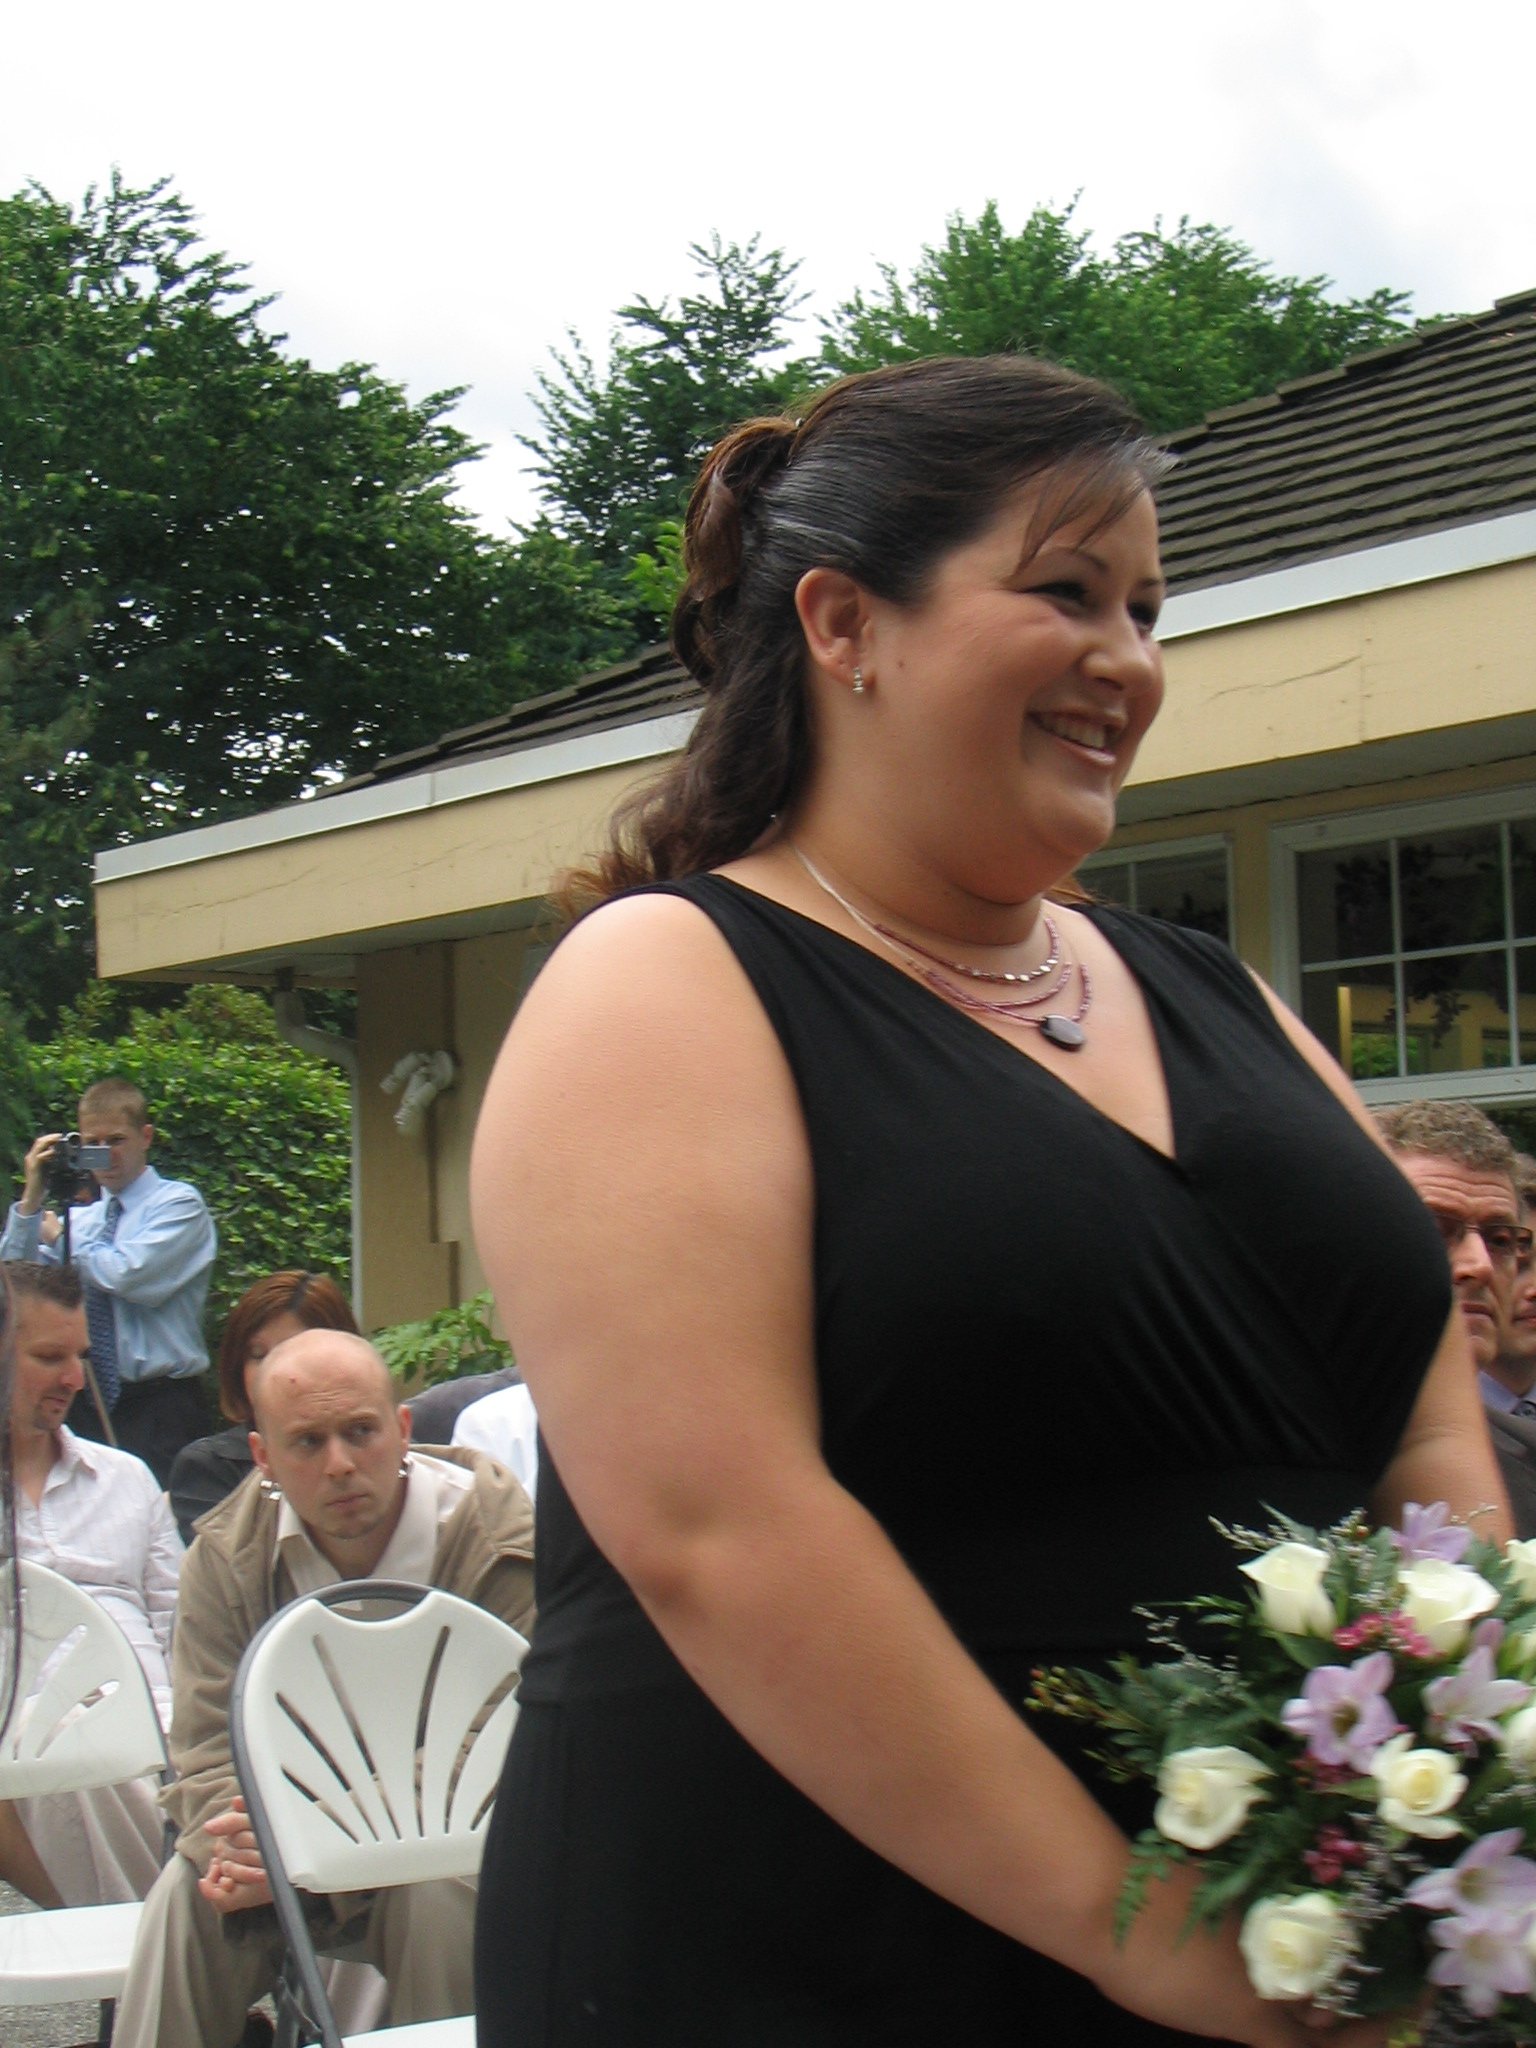 a woman is holding a bouquet at an outdoor event